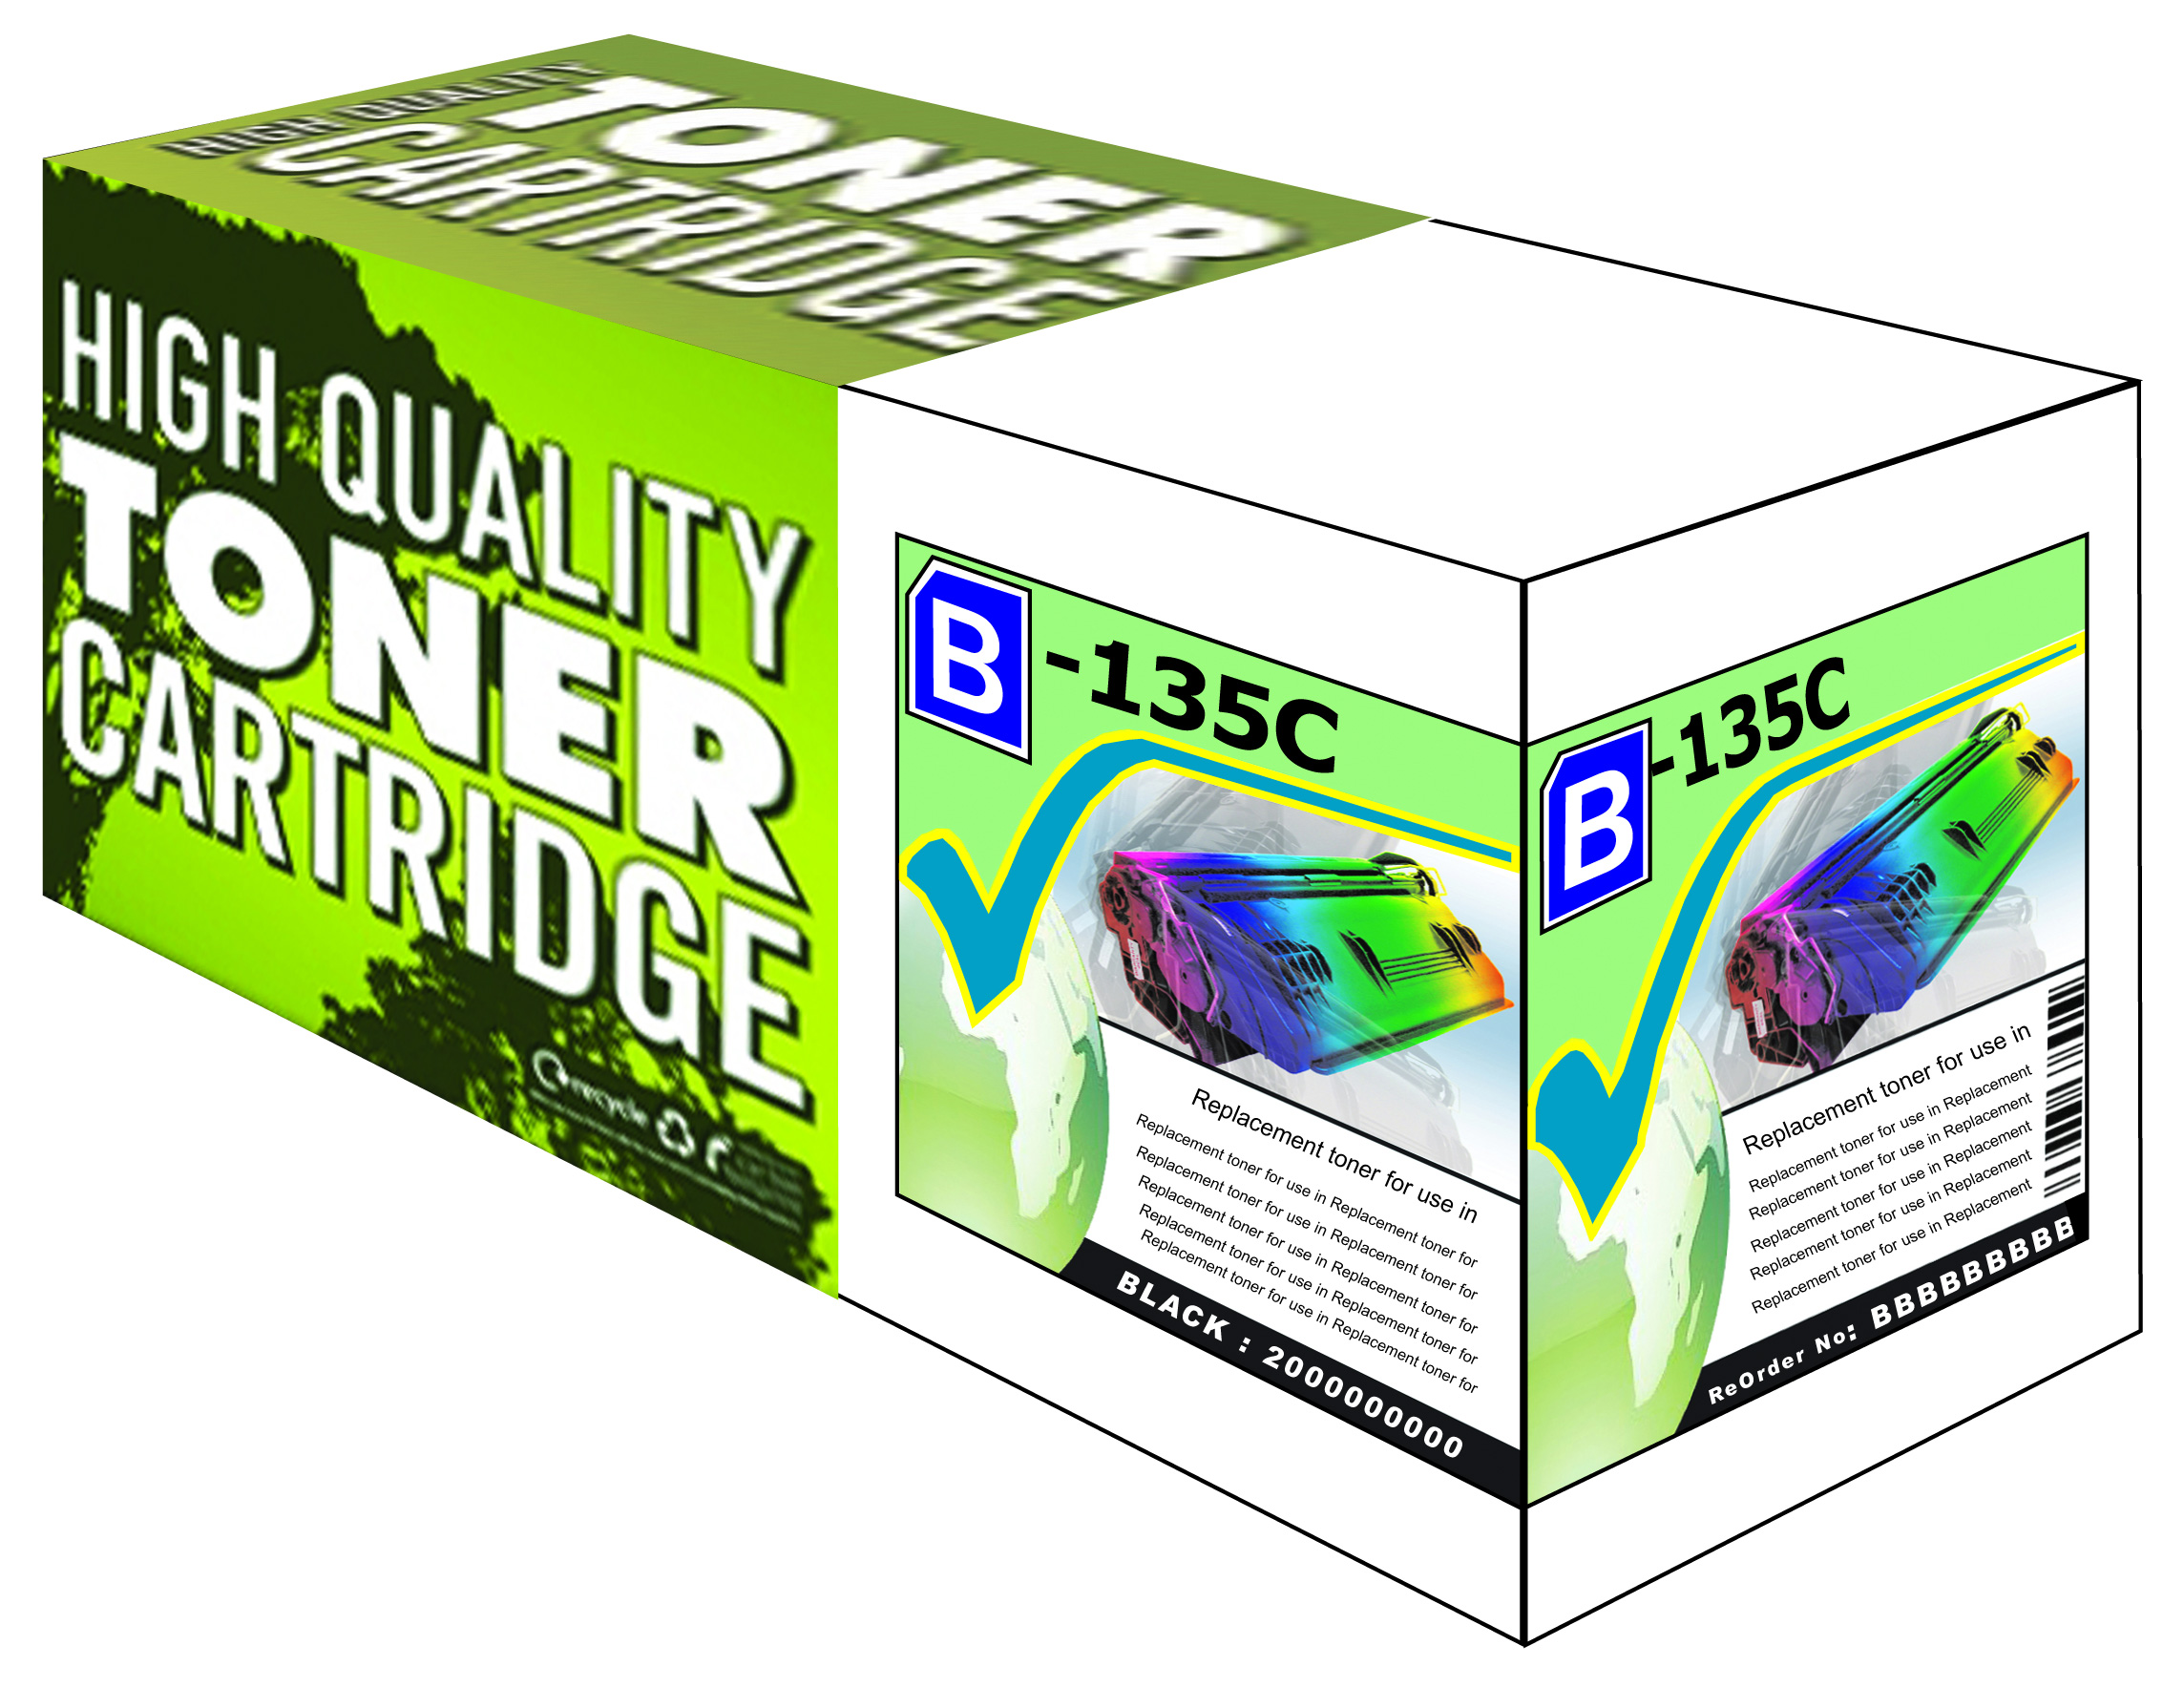 Tru Image High Capacity Cyan Toner Compatible with Brother TN-130C / TN-135C